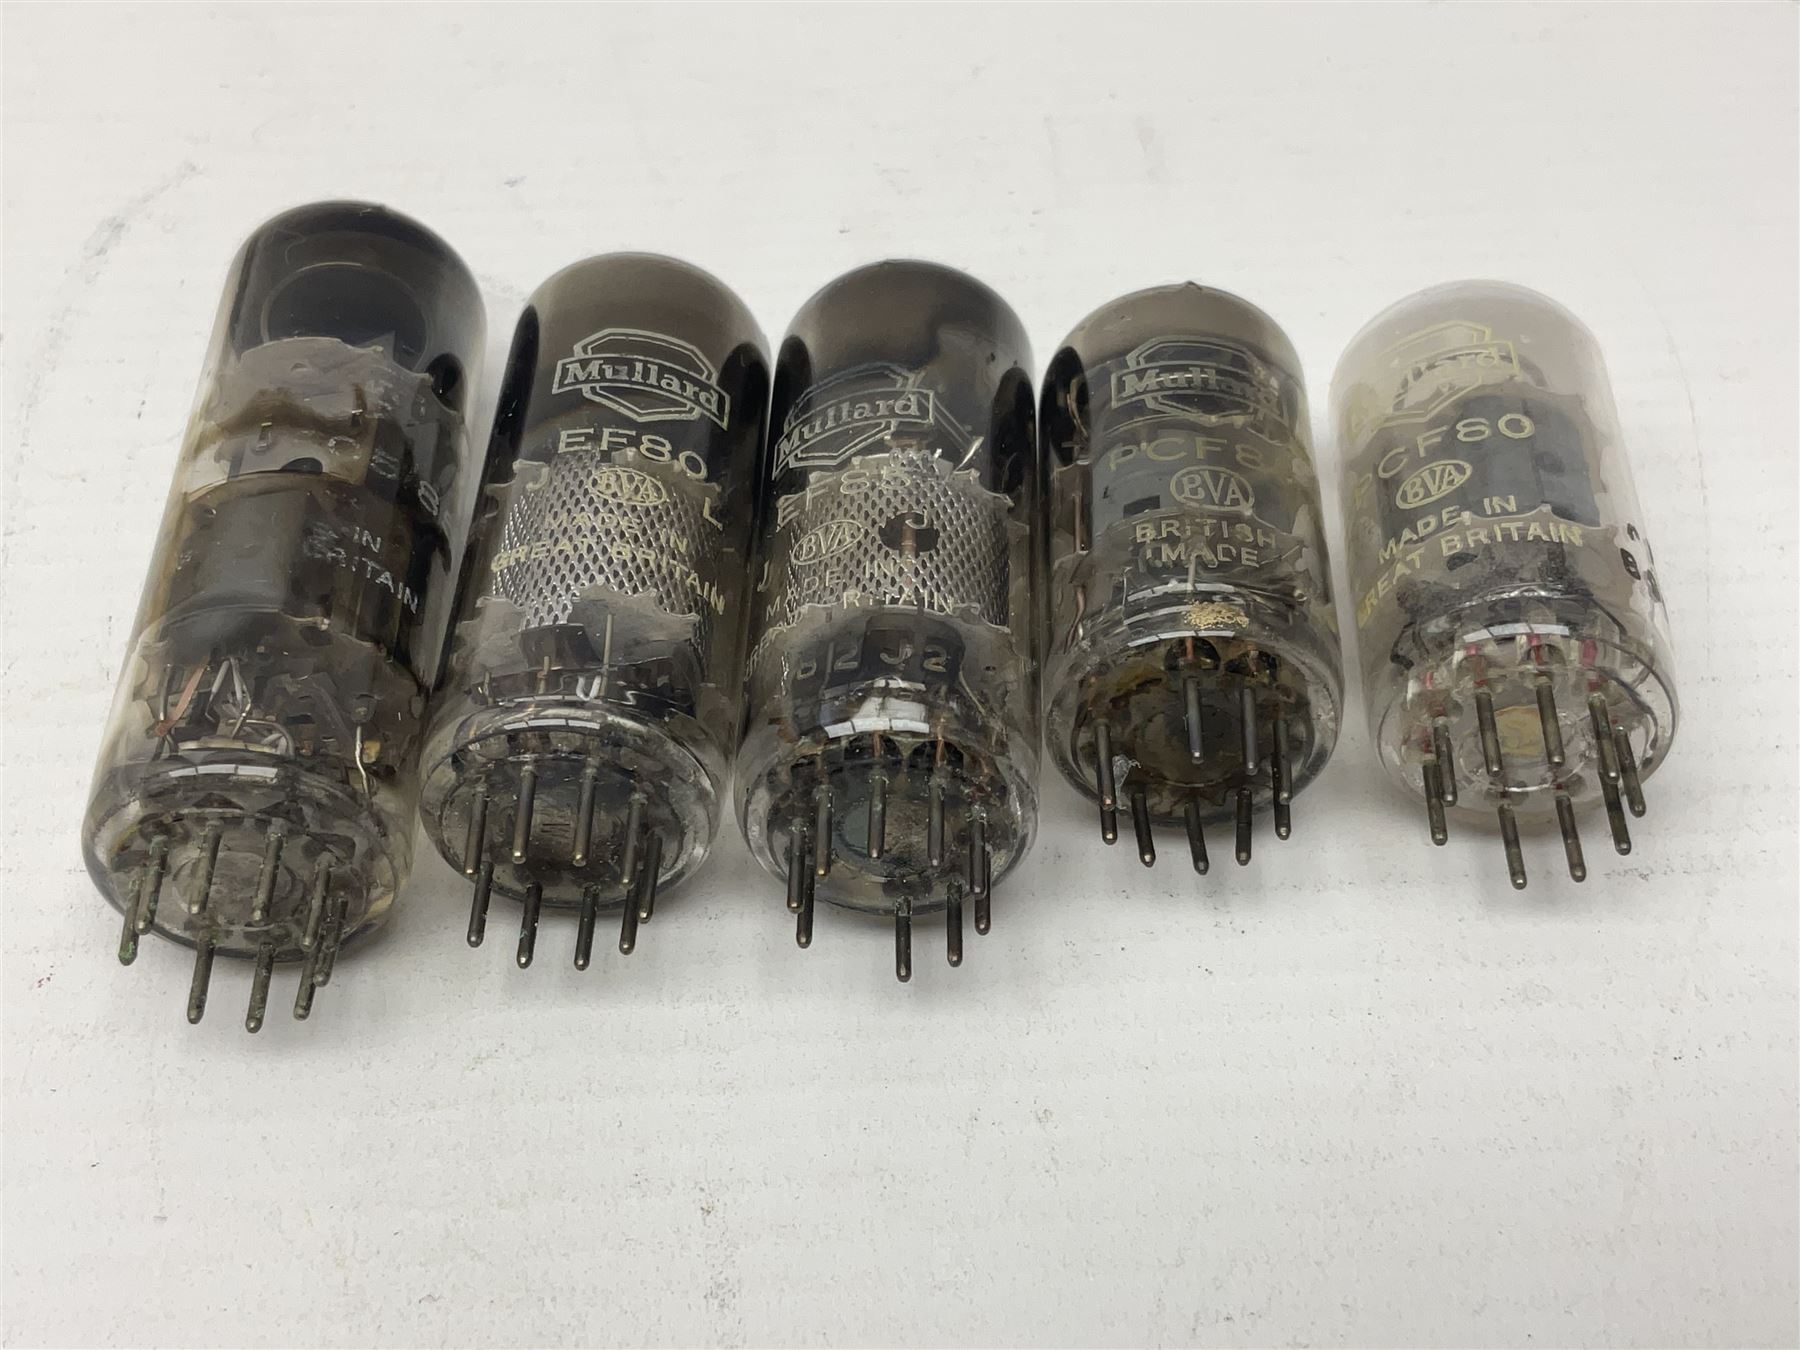 Collection of Mullard thermionic radio valves/vacuum tubes - Image 3 of 12